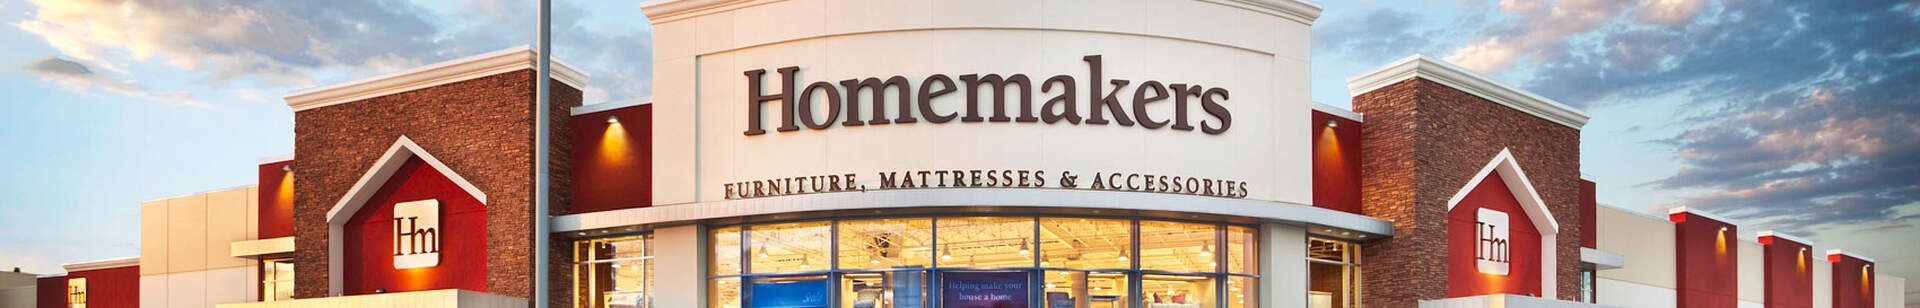 homemakers storefront